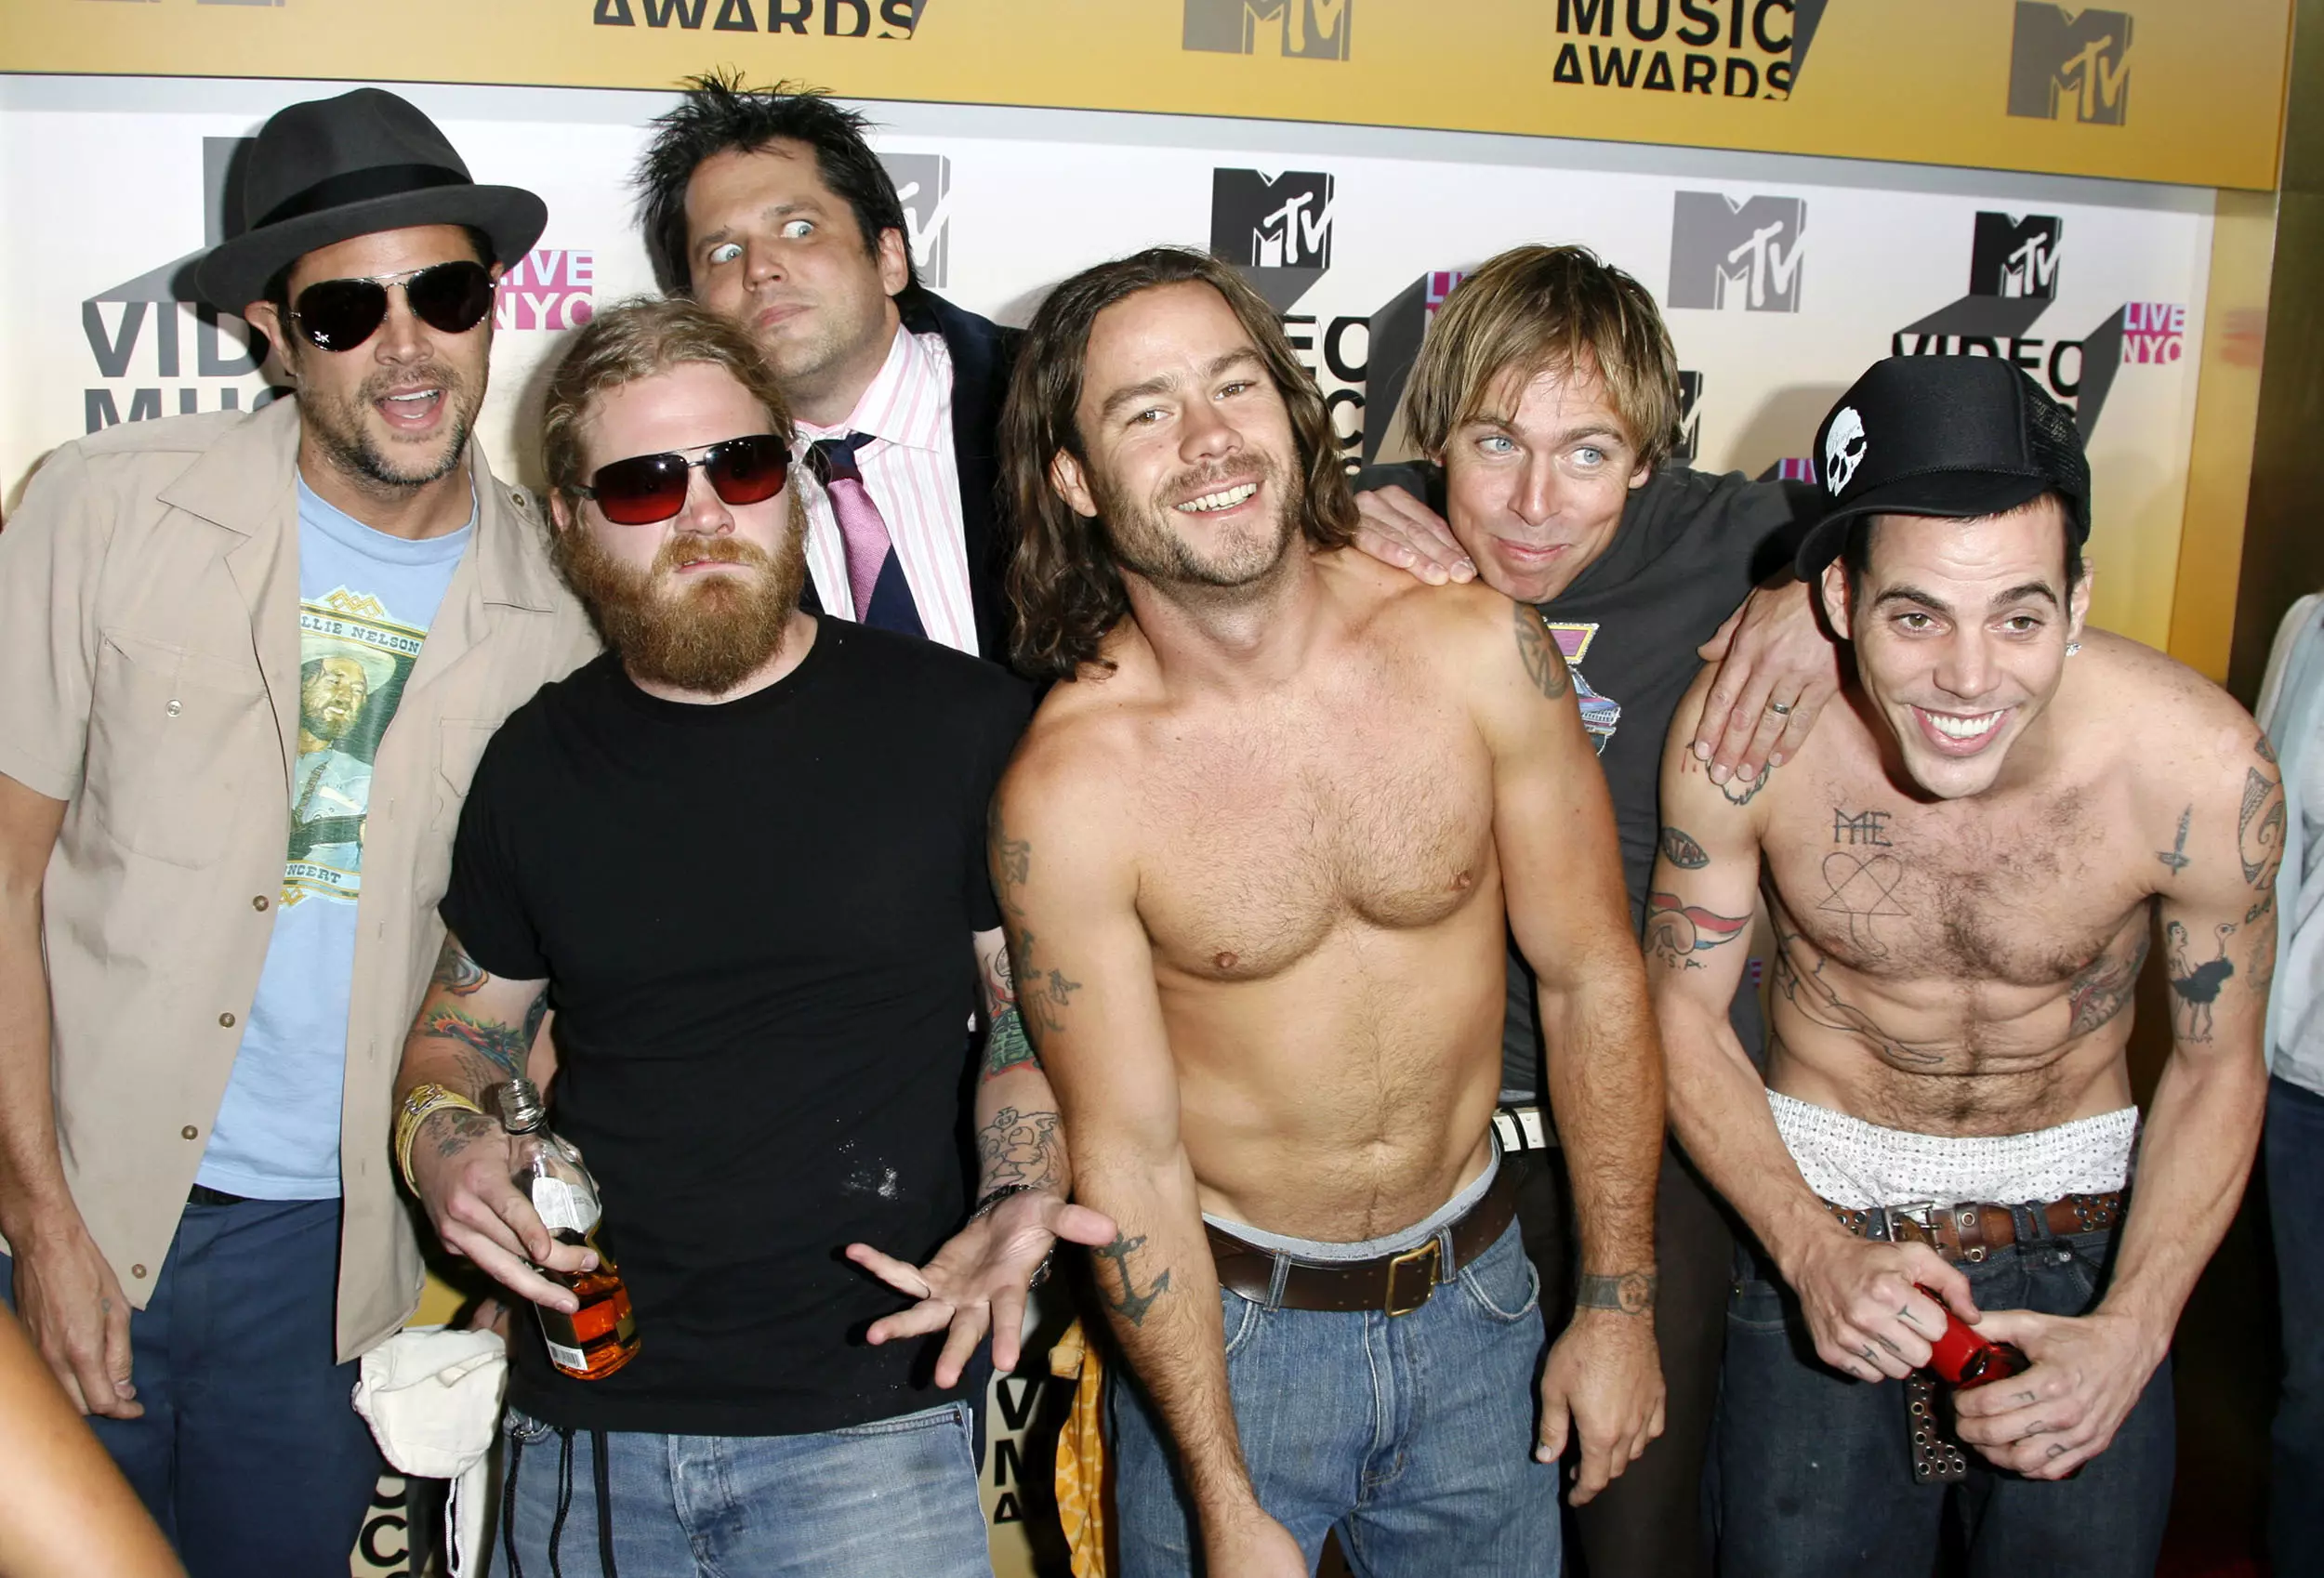 The Jackass boys back in the day.